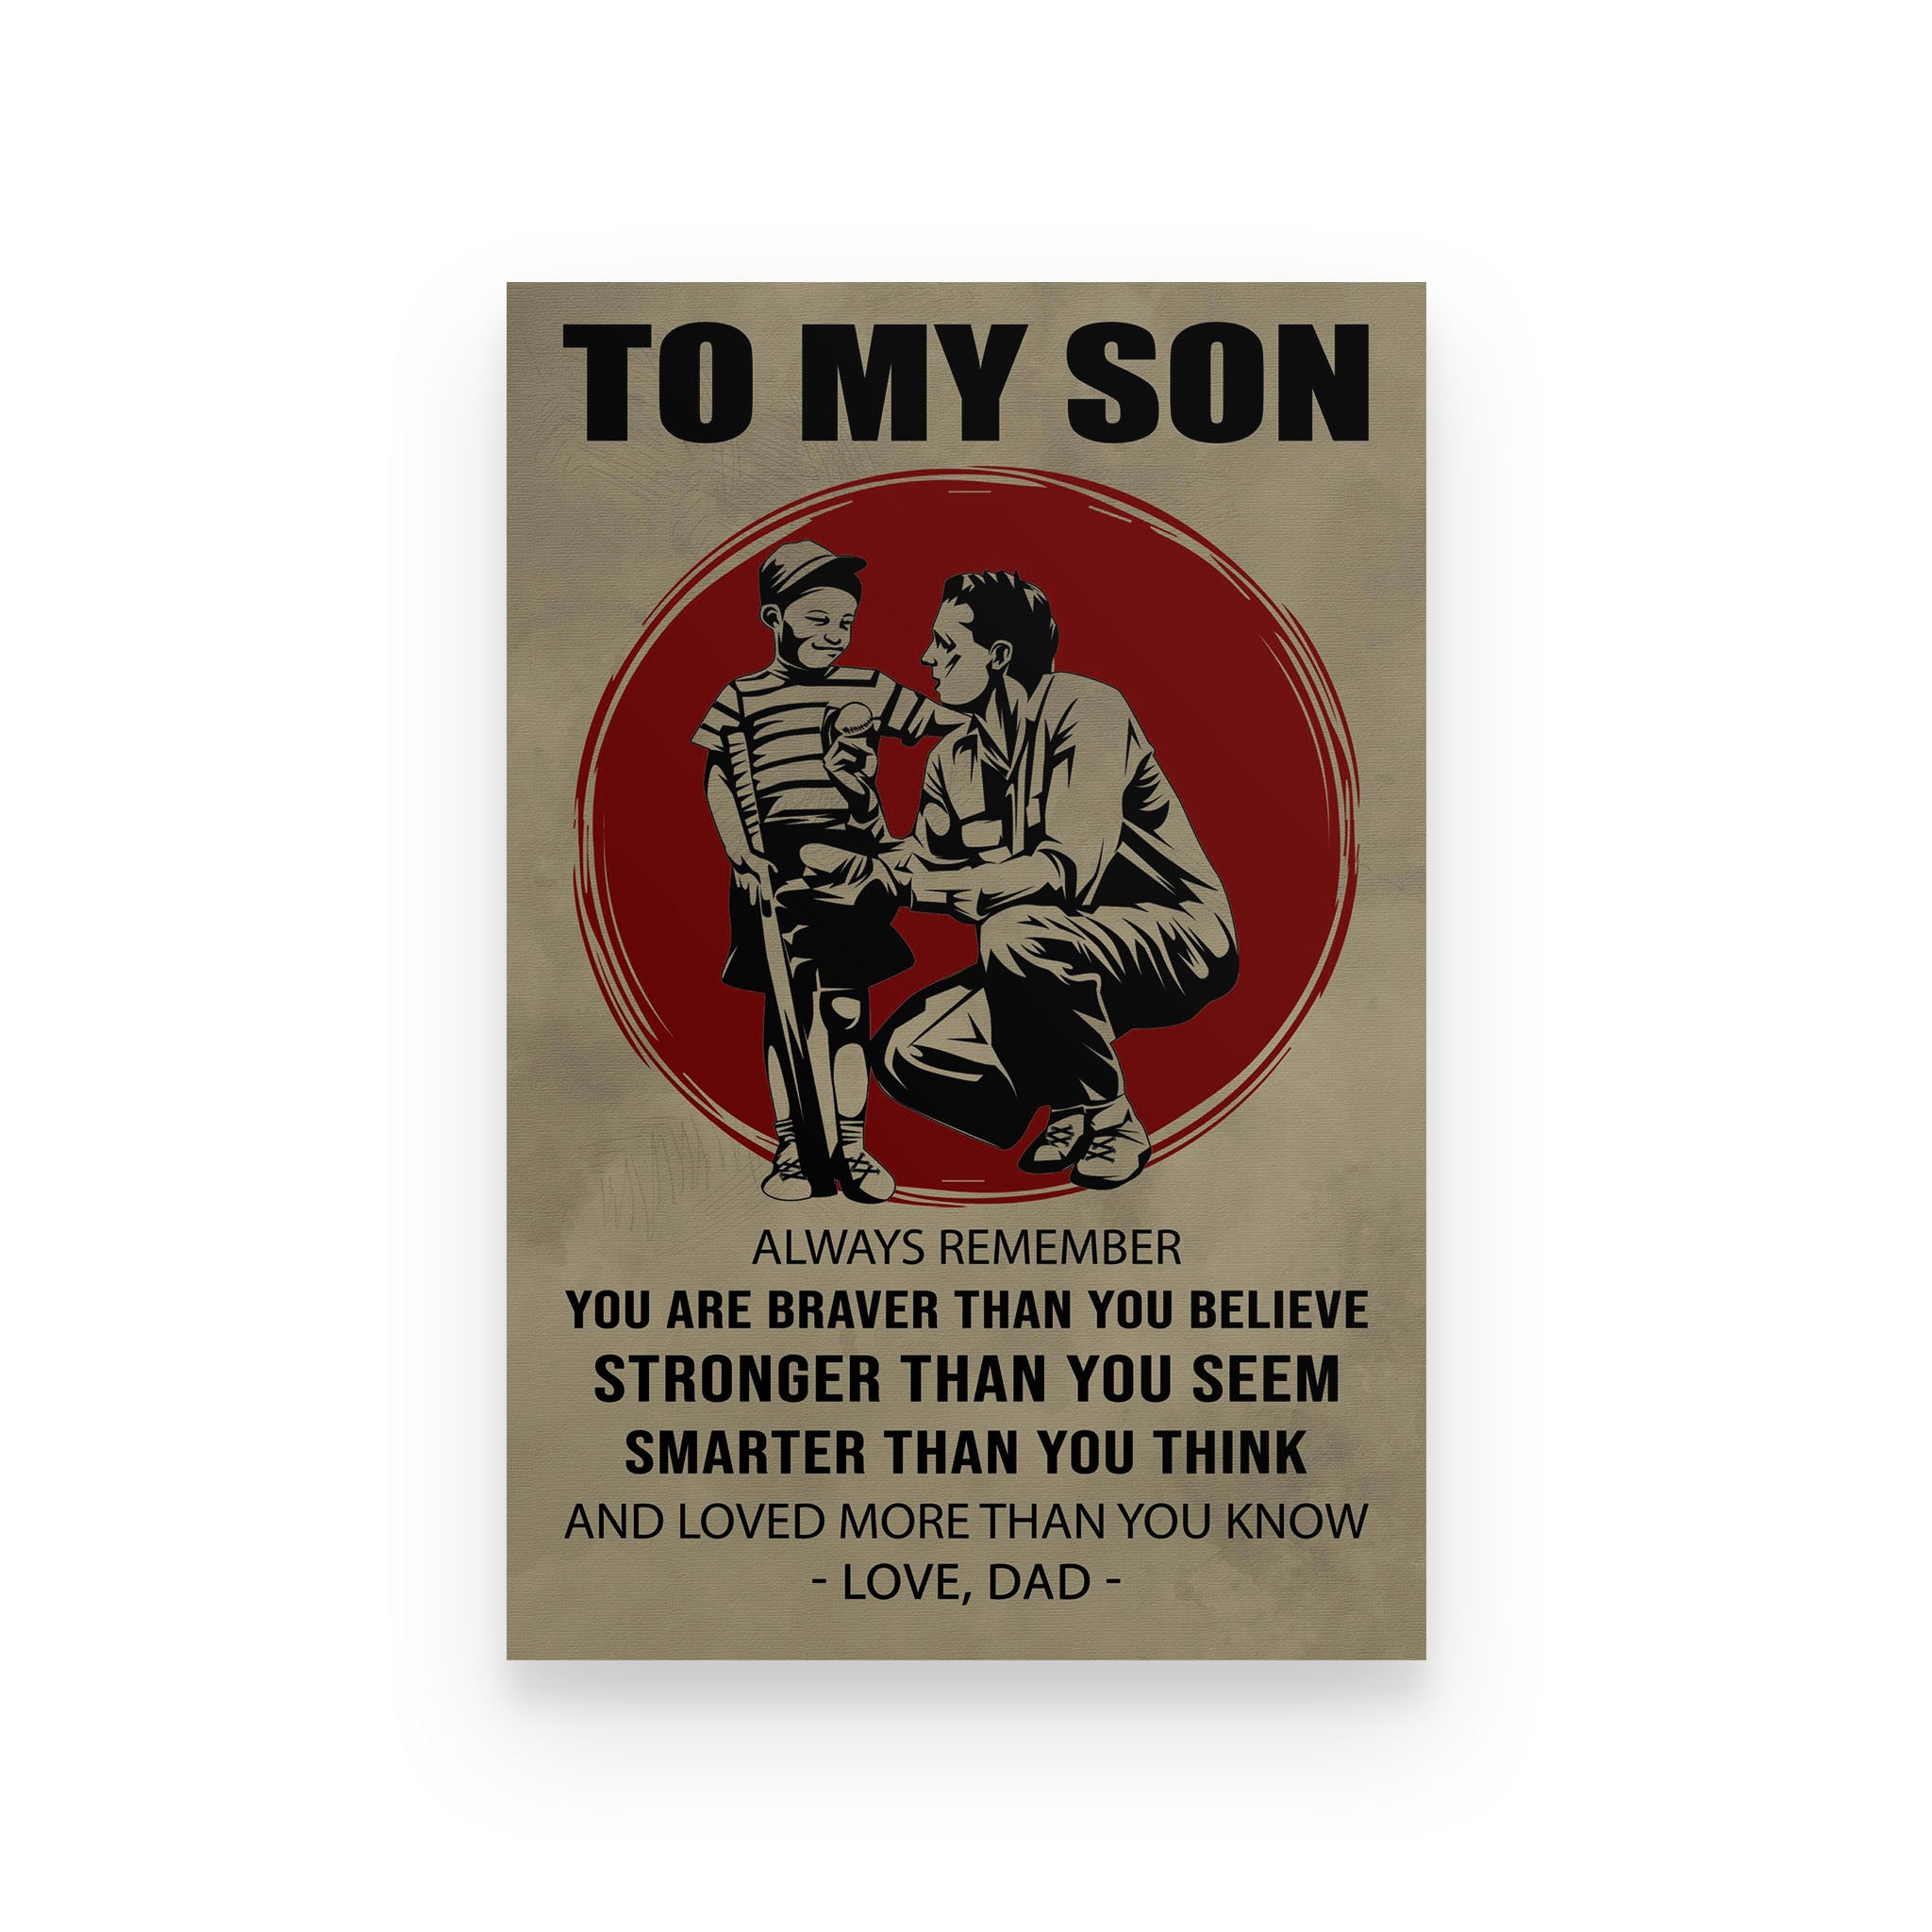 Baseball poster dad to son always remember you are braver than you believe